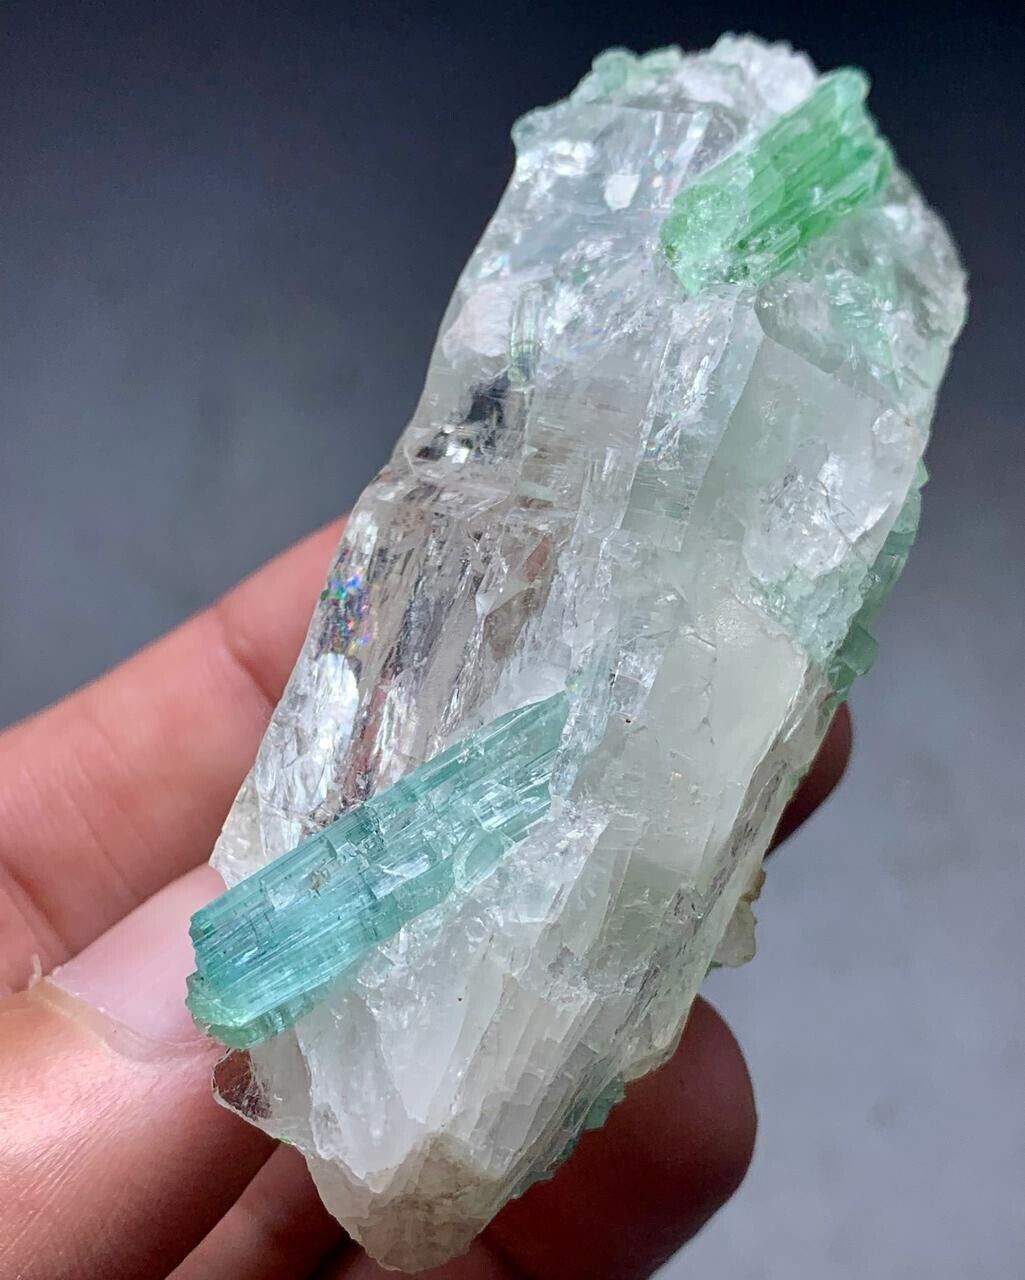 450 ct Tourmaline Crystals on Quartz from Afghanistan